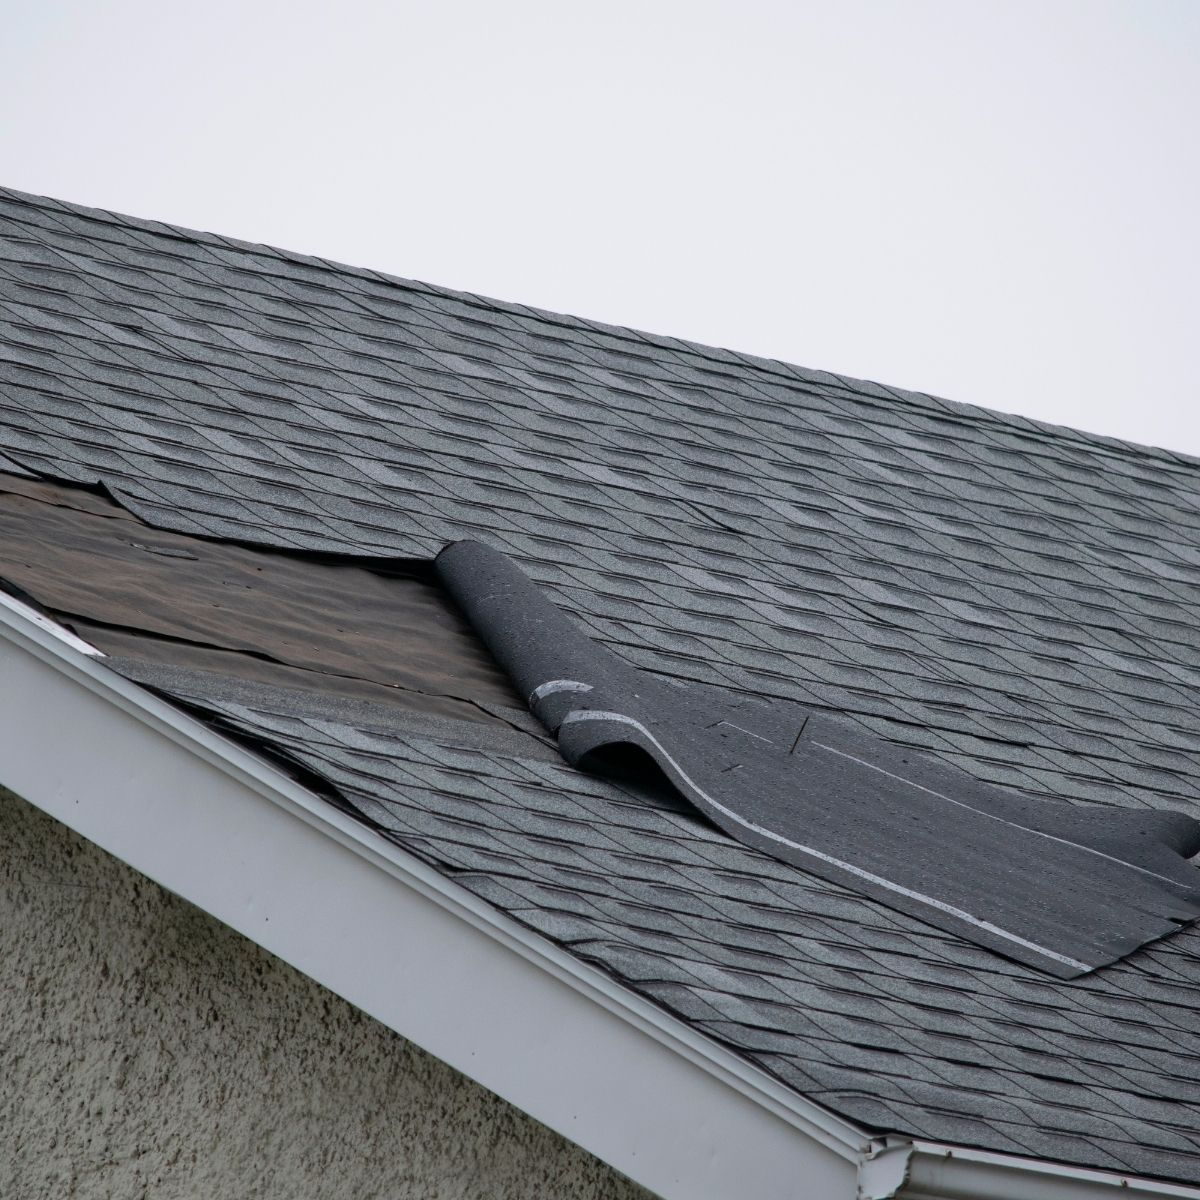 Shingle roof that needs to be repaired. A couple shingle are wind damaged